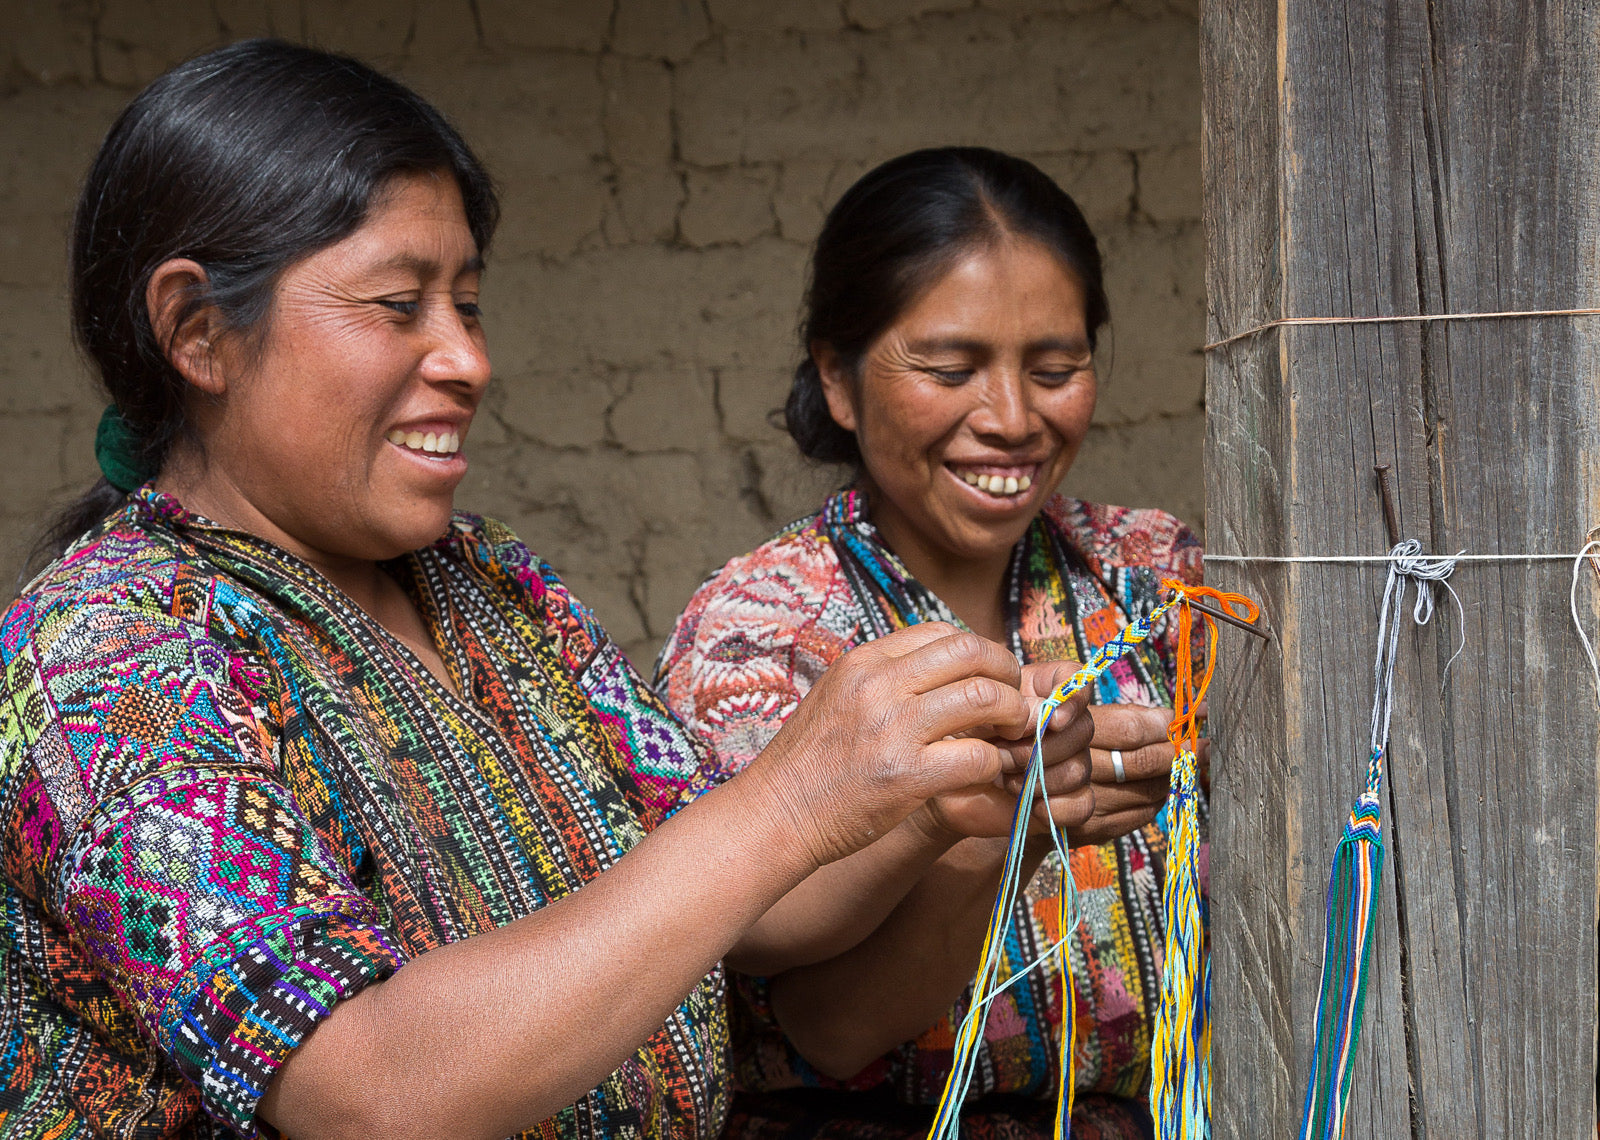 Two smiling adult women pictured from the waist up weave friendship bracelets from colorful thread, with the bracelets attached to a wooden pole. They wear handwoven huipiles from Sololá Guatemala and appear to be laughing.